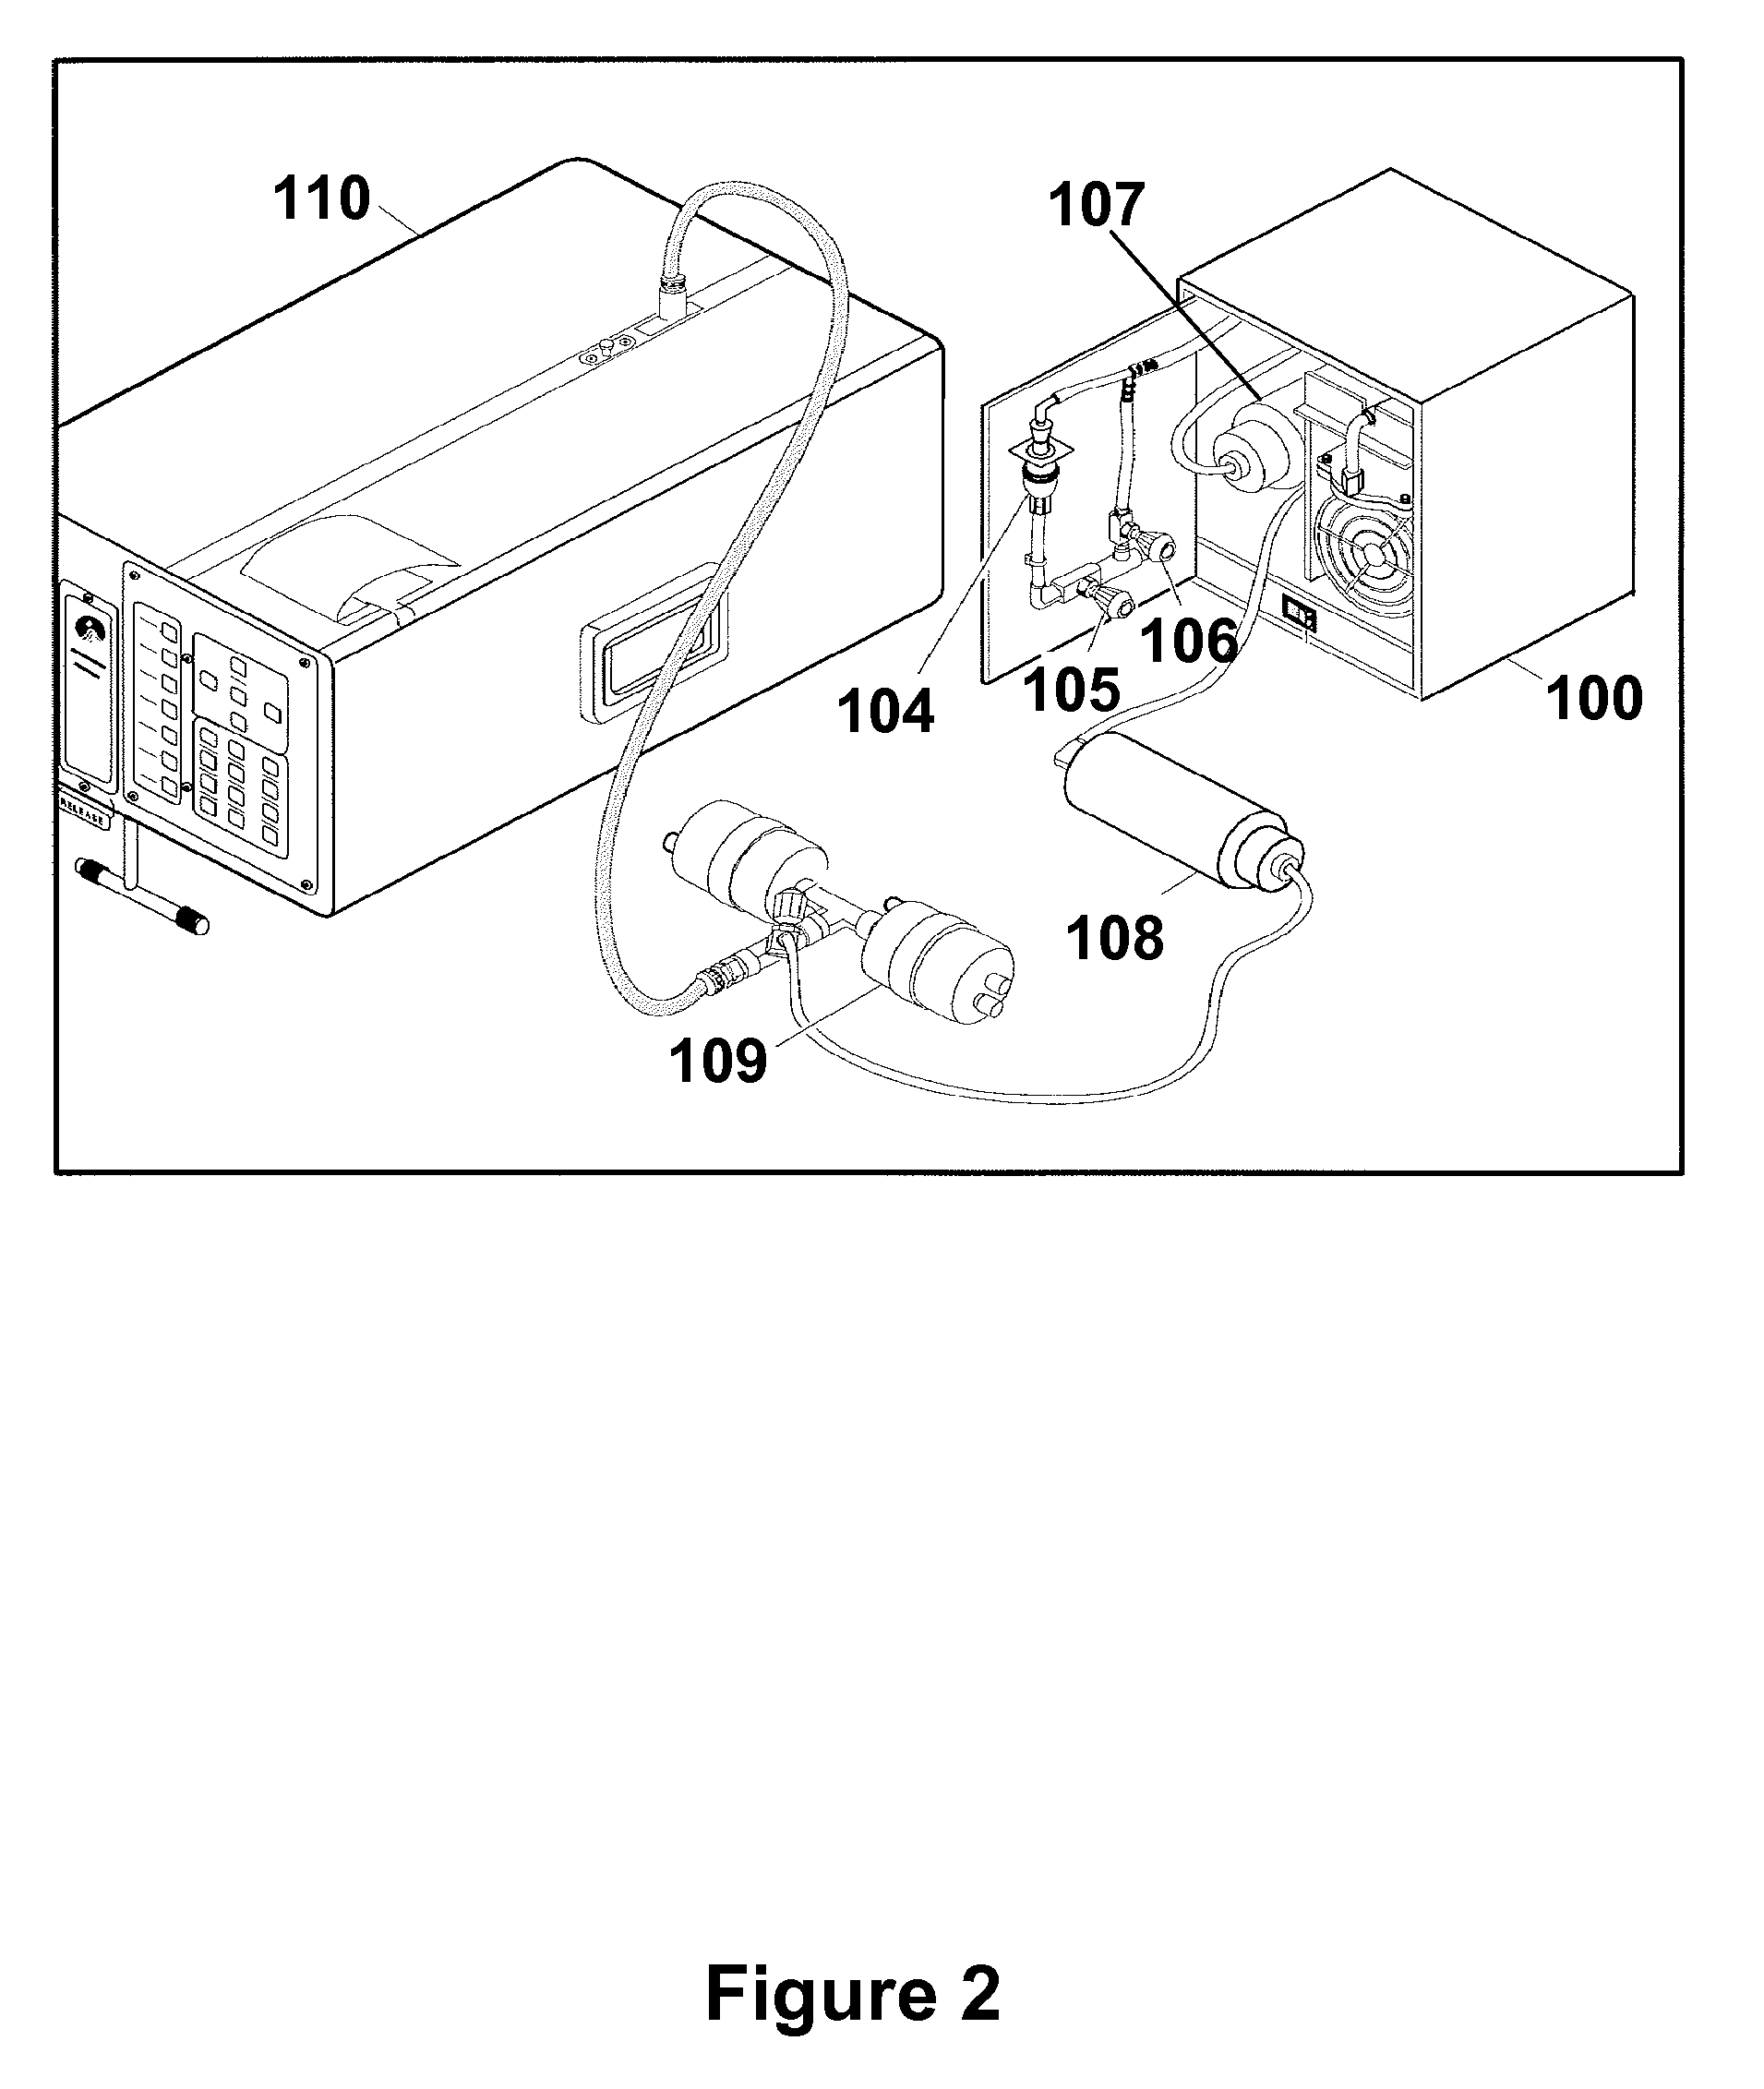 System and method for calibration verification of an optical particle counter